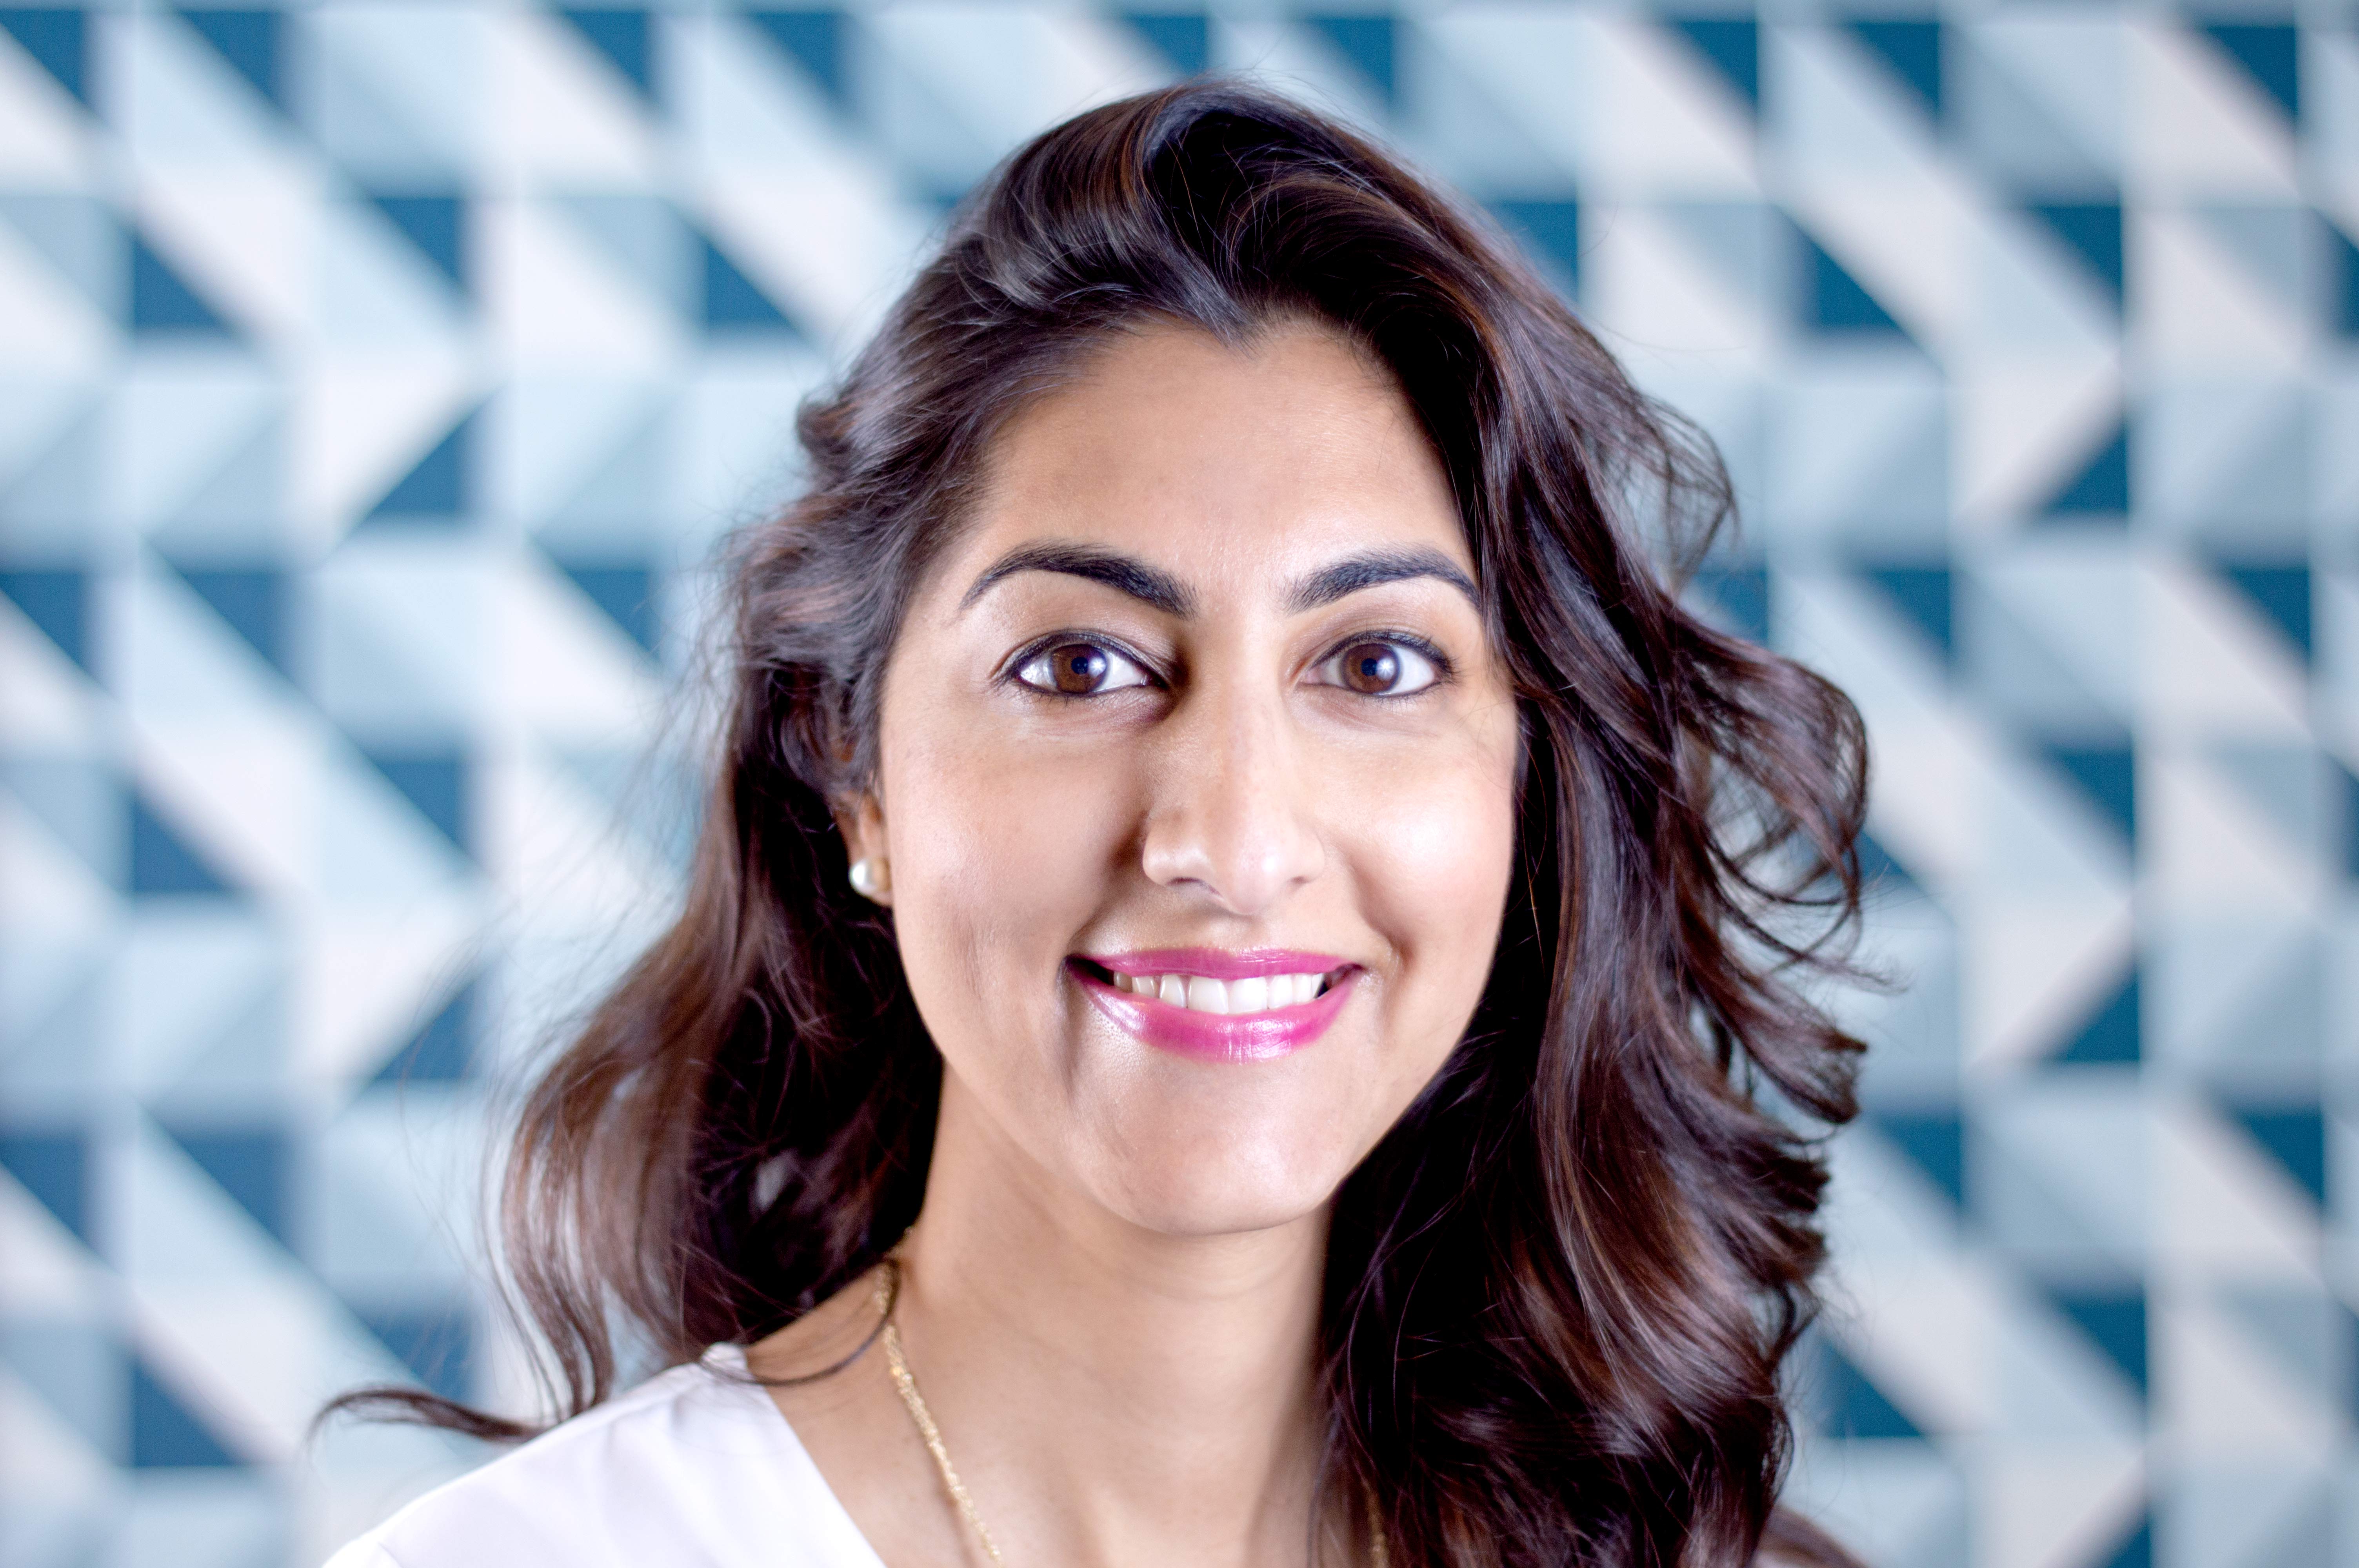 Luvleen Sidhu, Co-Founder of BankMobile, to Speak at the FORTUNE Brainstorm Finance Conference in Montauk, NY thumbnail